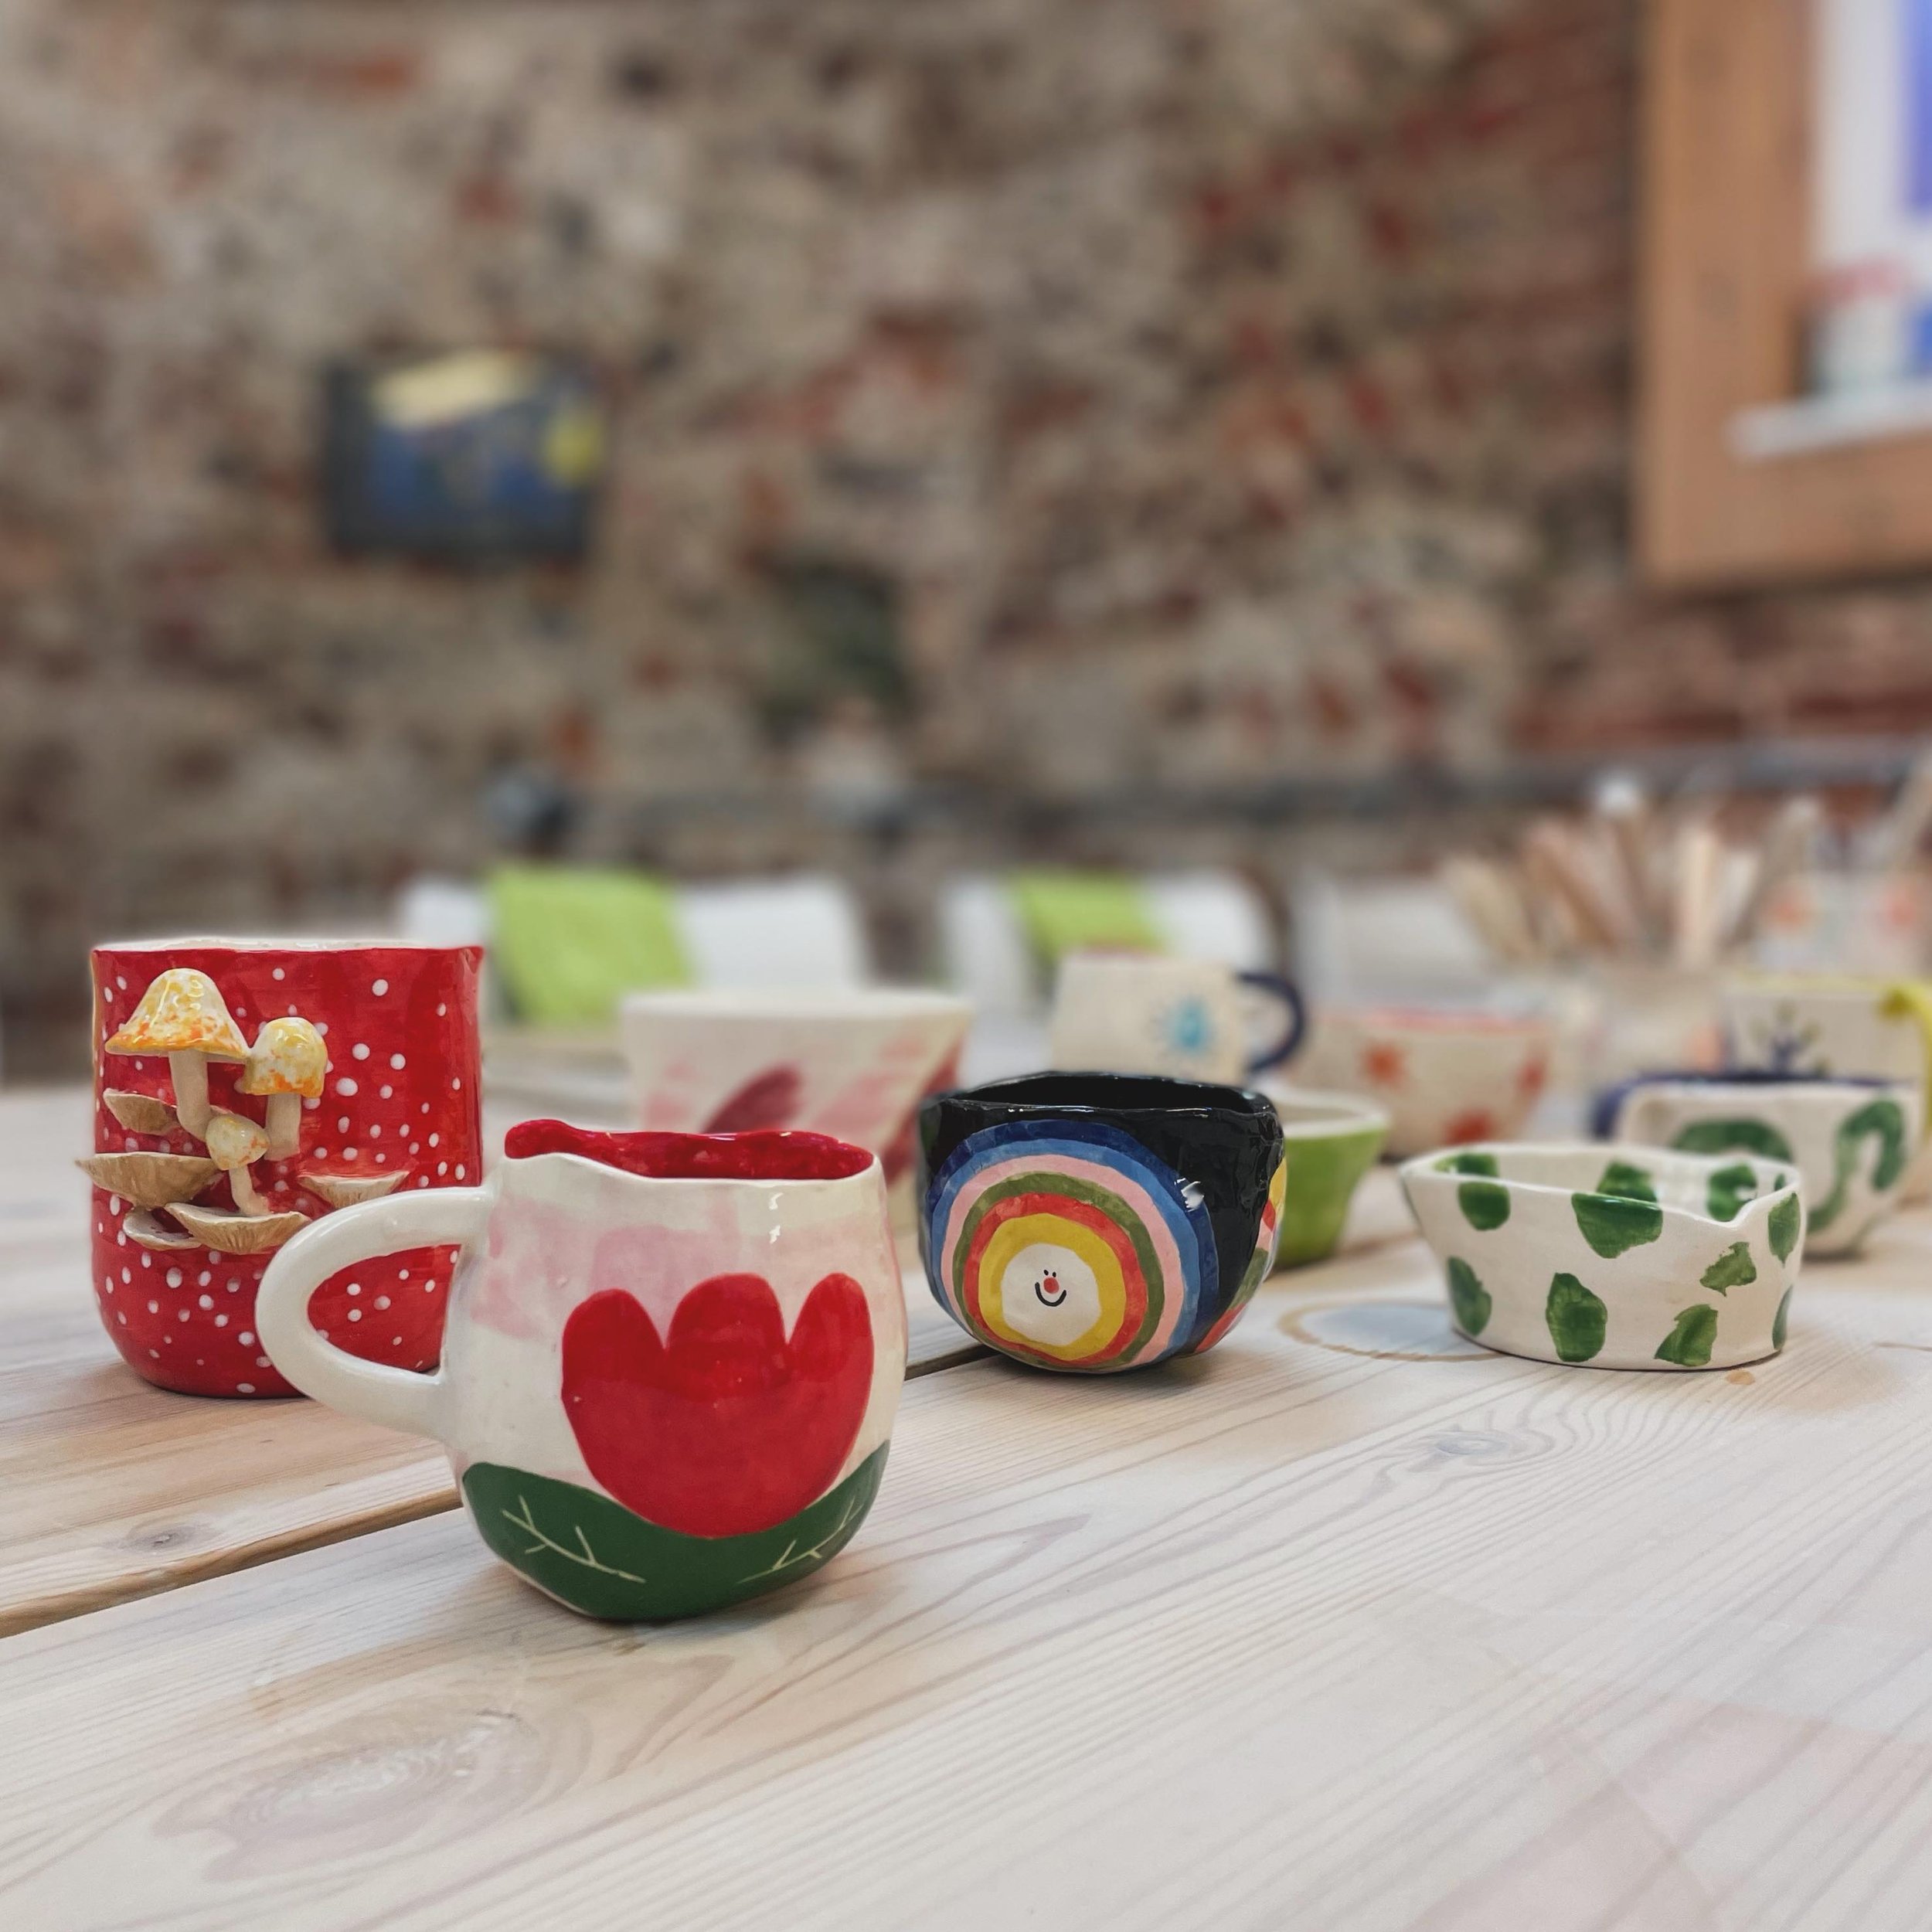 due to some last minute cancellations we&rsquo;ve got 3 spaces on our evening class this week - Thursday 18th April 6-9pm - where you&rsquo;ll get to learn how to make a mug and a bowl using the potters wheel and hand building techniques! just &pound